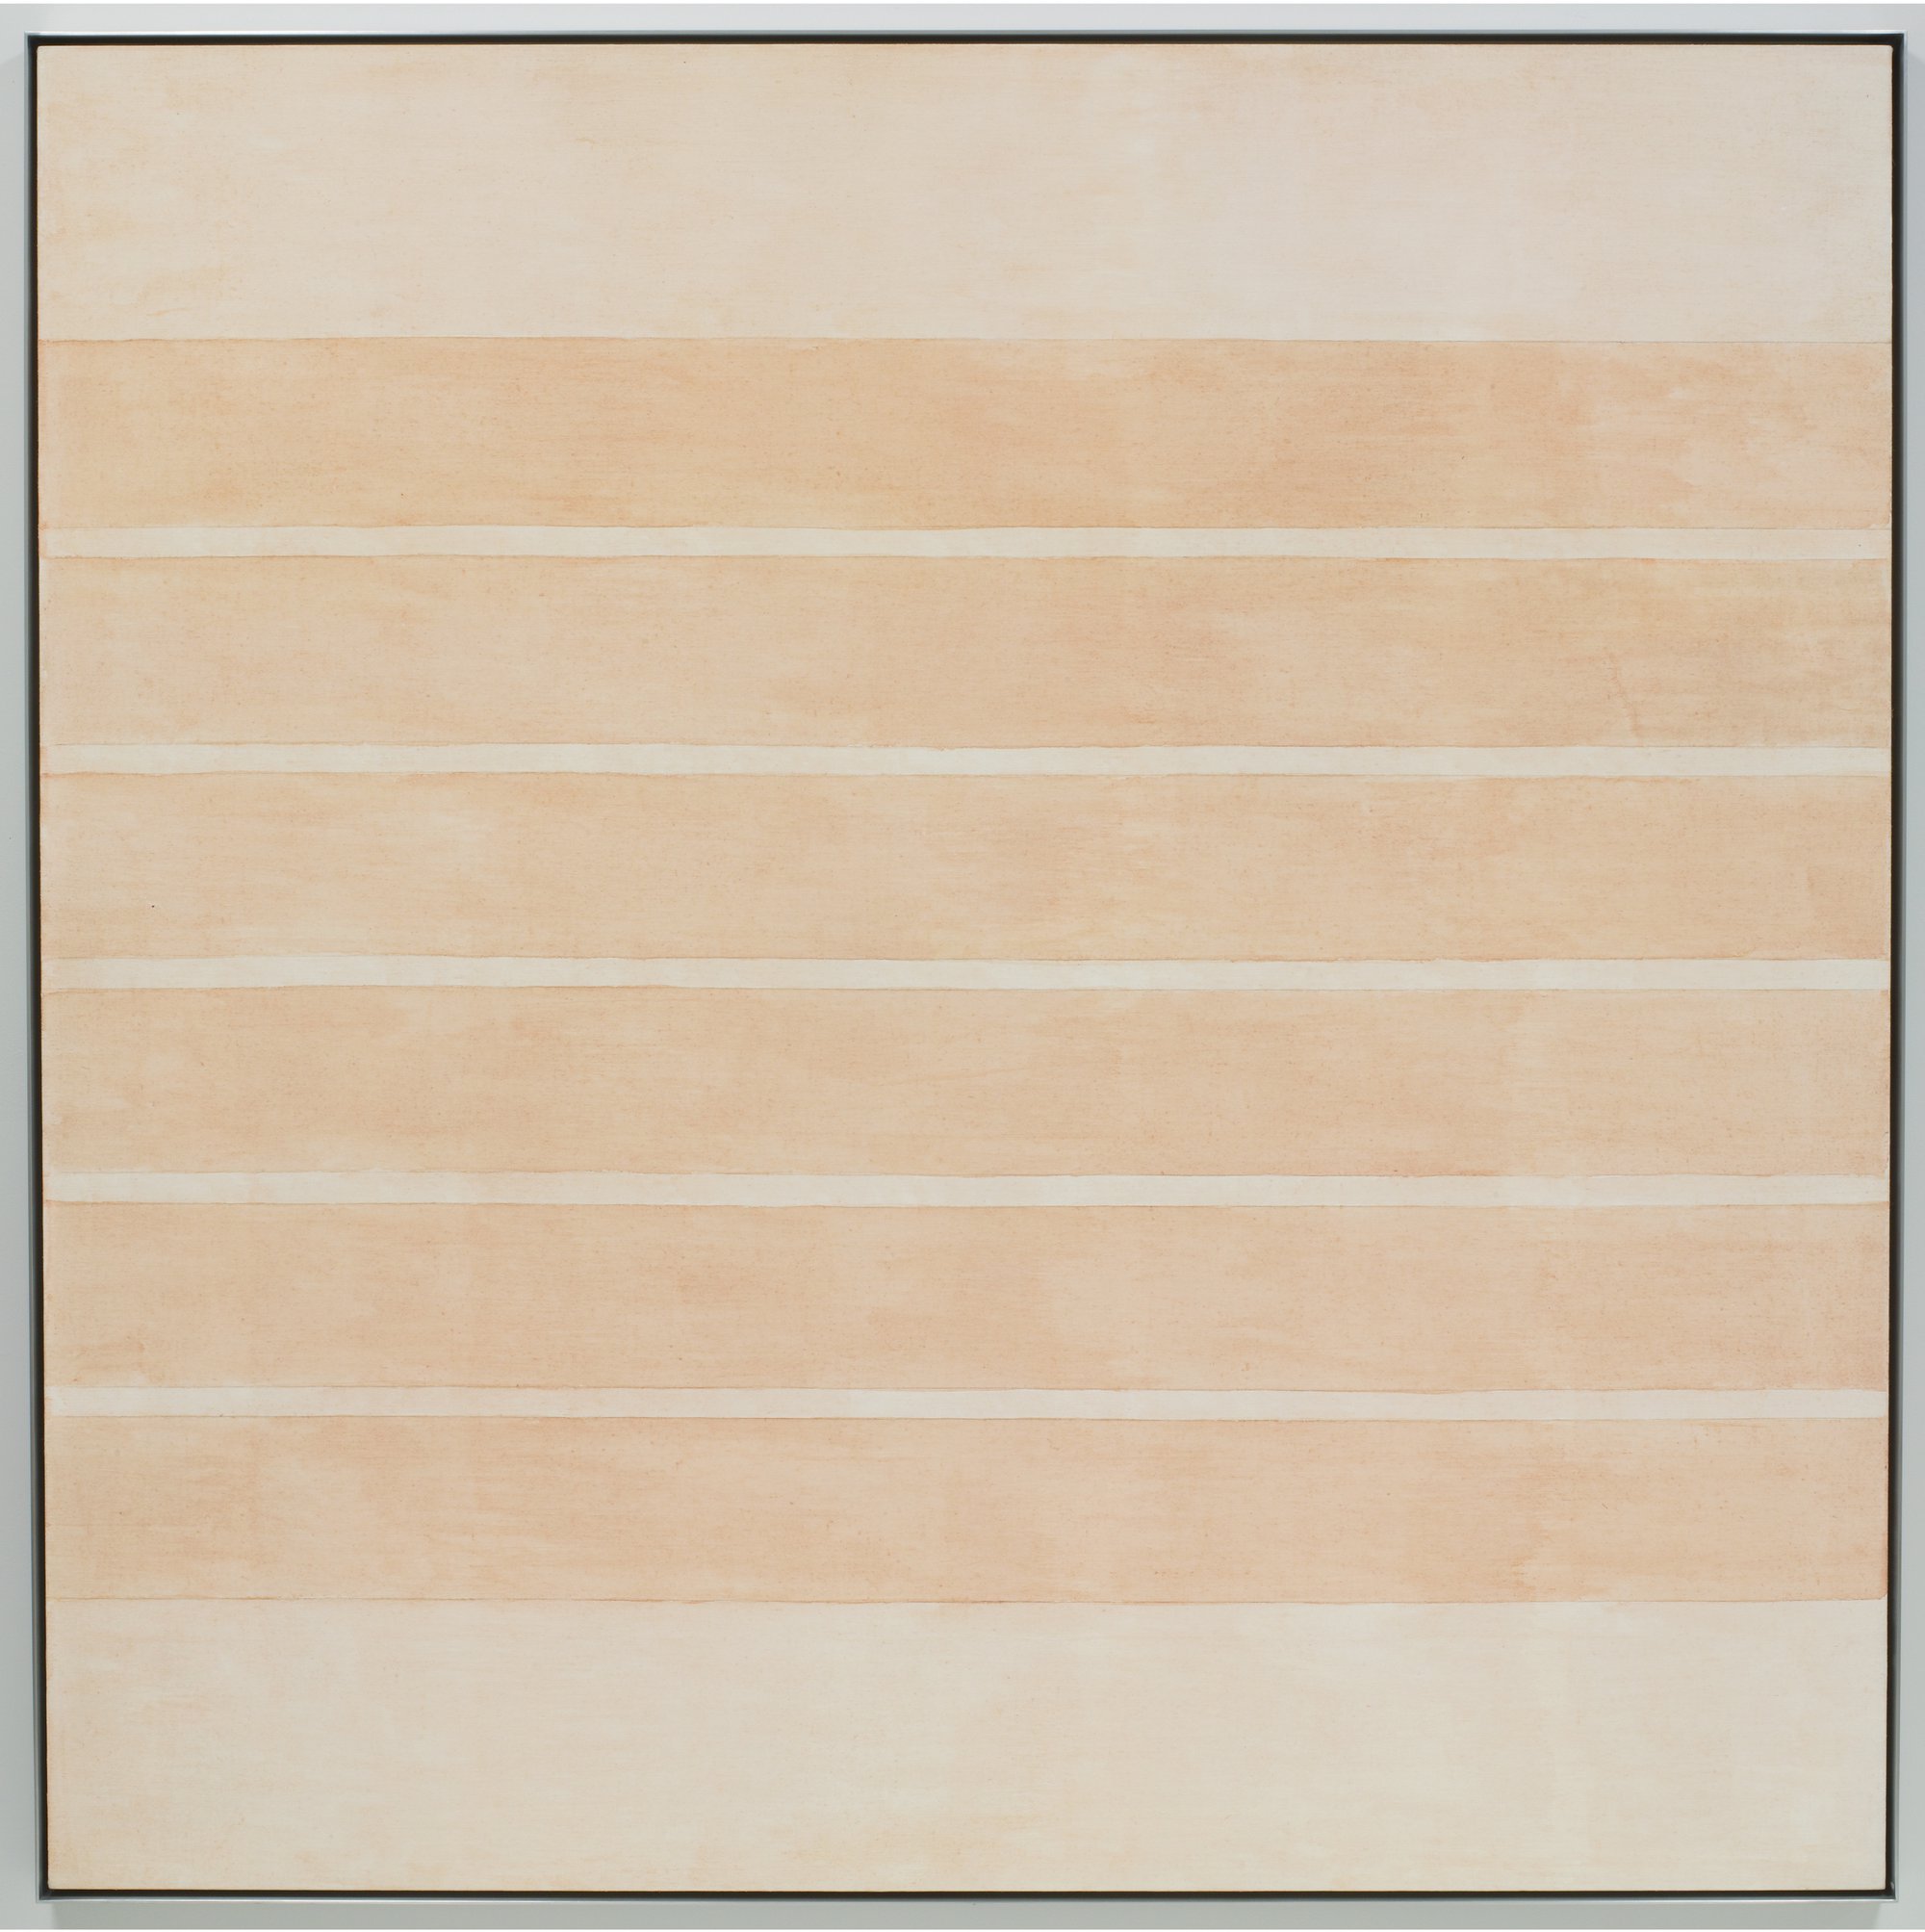 Agnes Martin | Pace Gallery